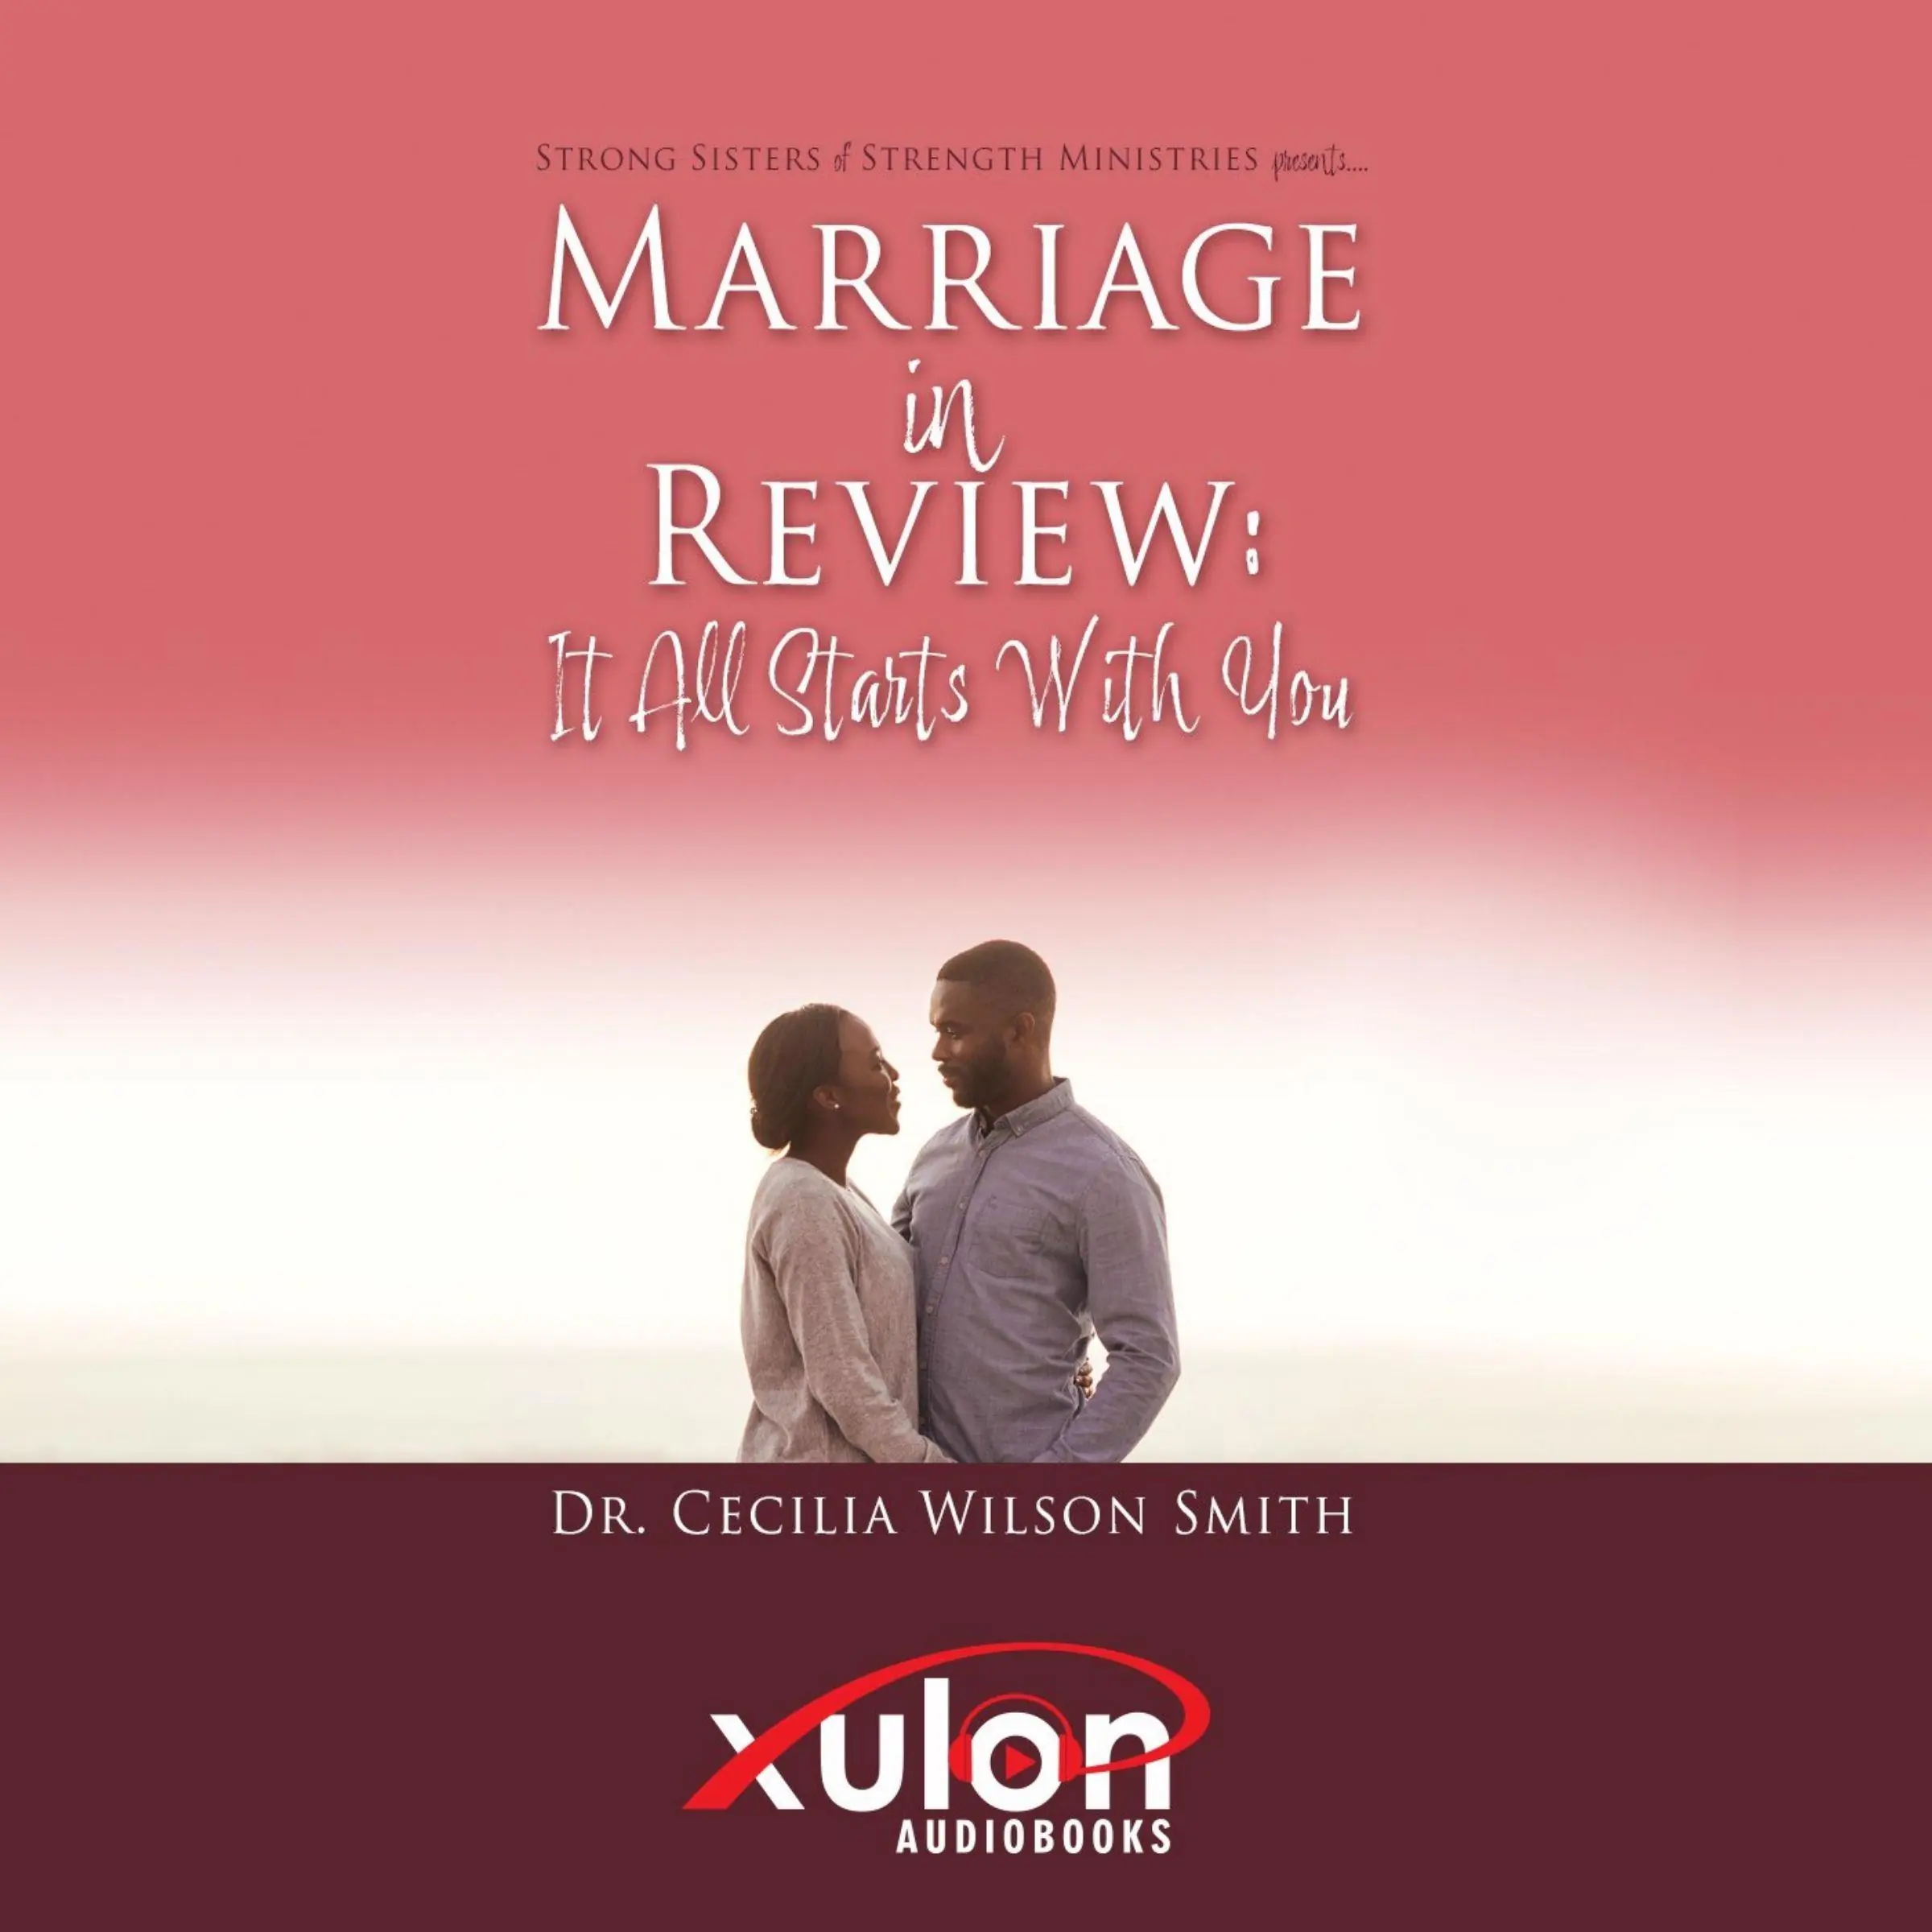 Marriage in Review: It All Starts With You: Strong Sisters of Strength Ministries presents... Audiobook by Dr. Cecilia Wilson Smith